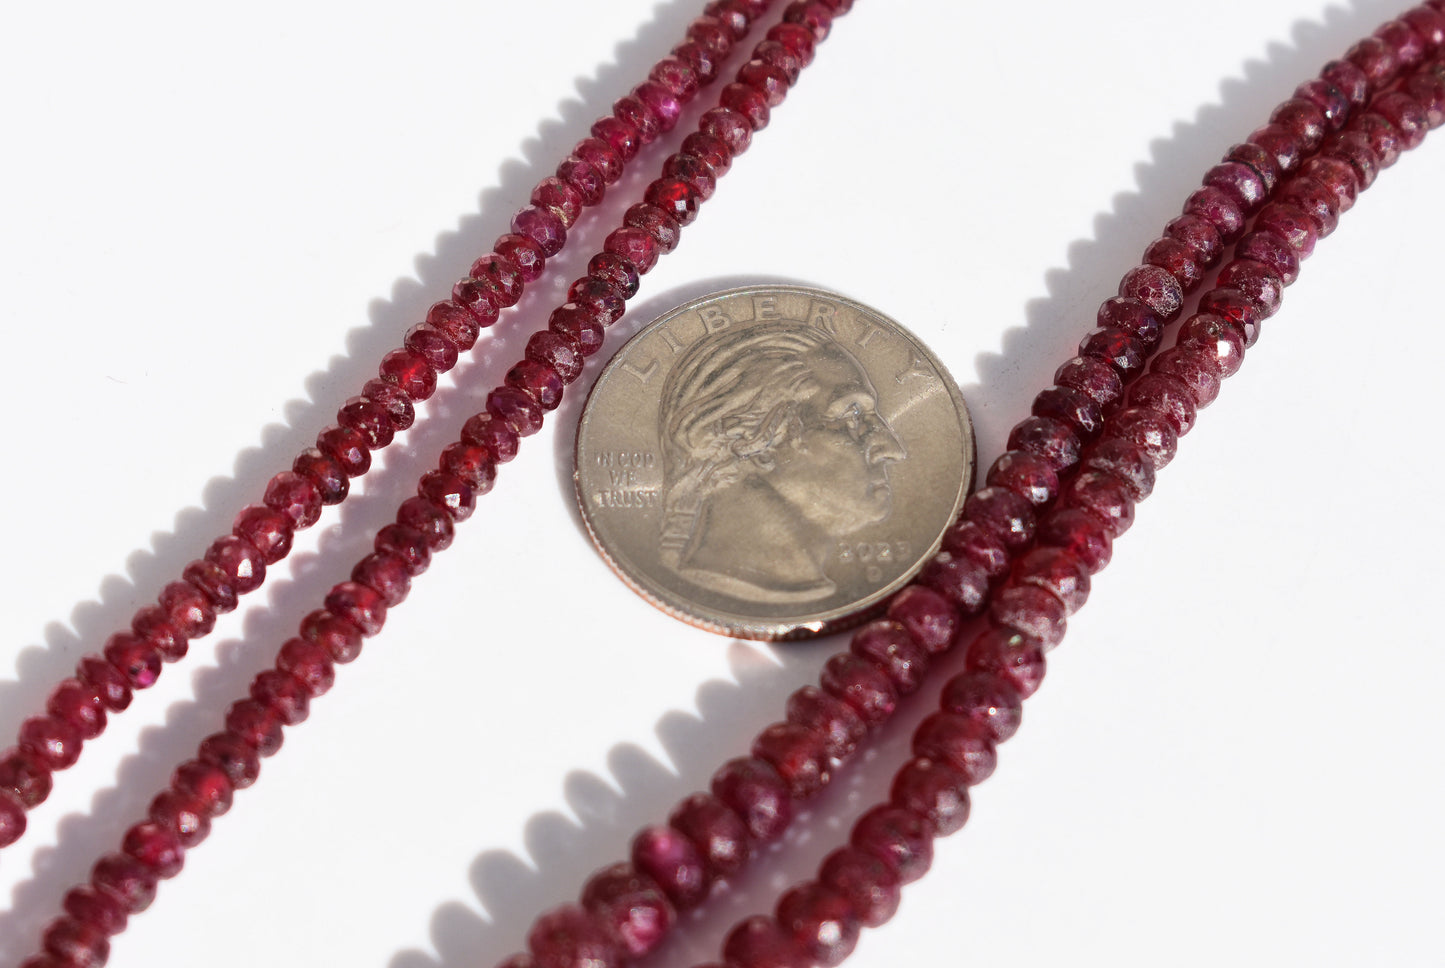 Ruby Rondelle Faceted Beads - Graduated 2.5-6mm